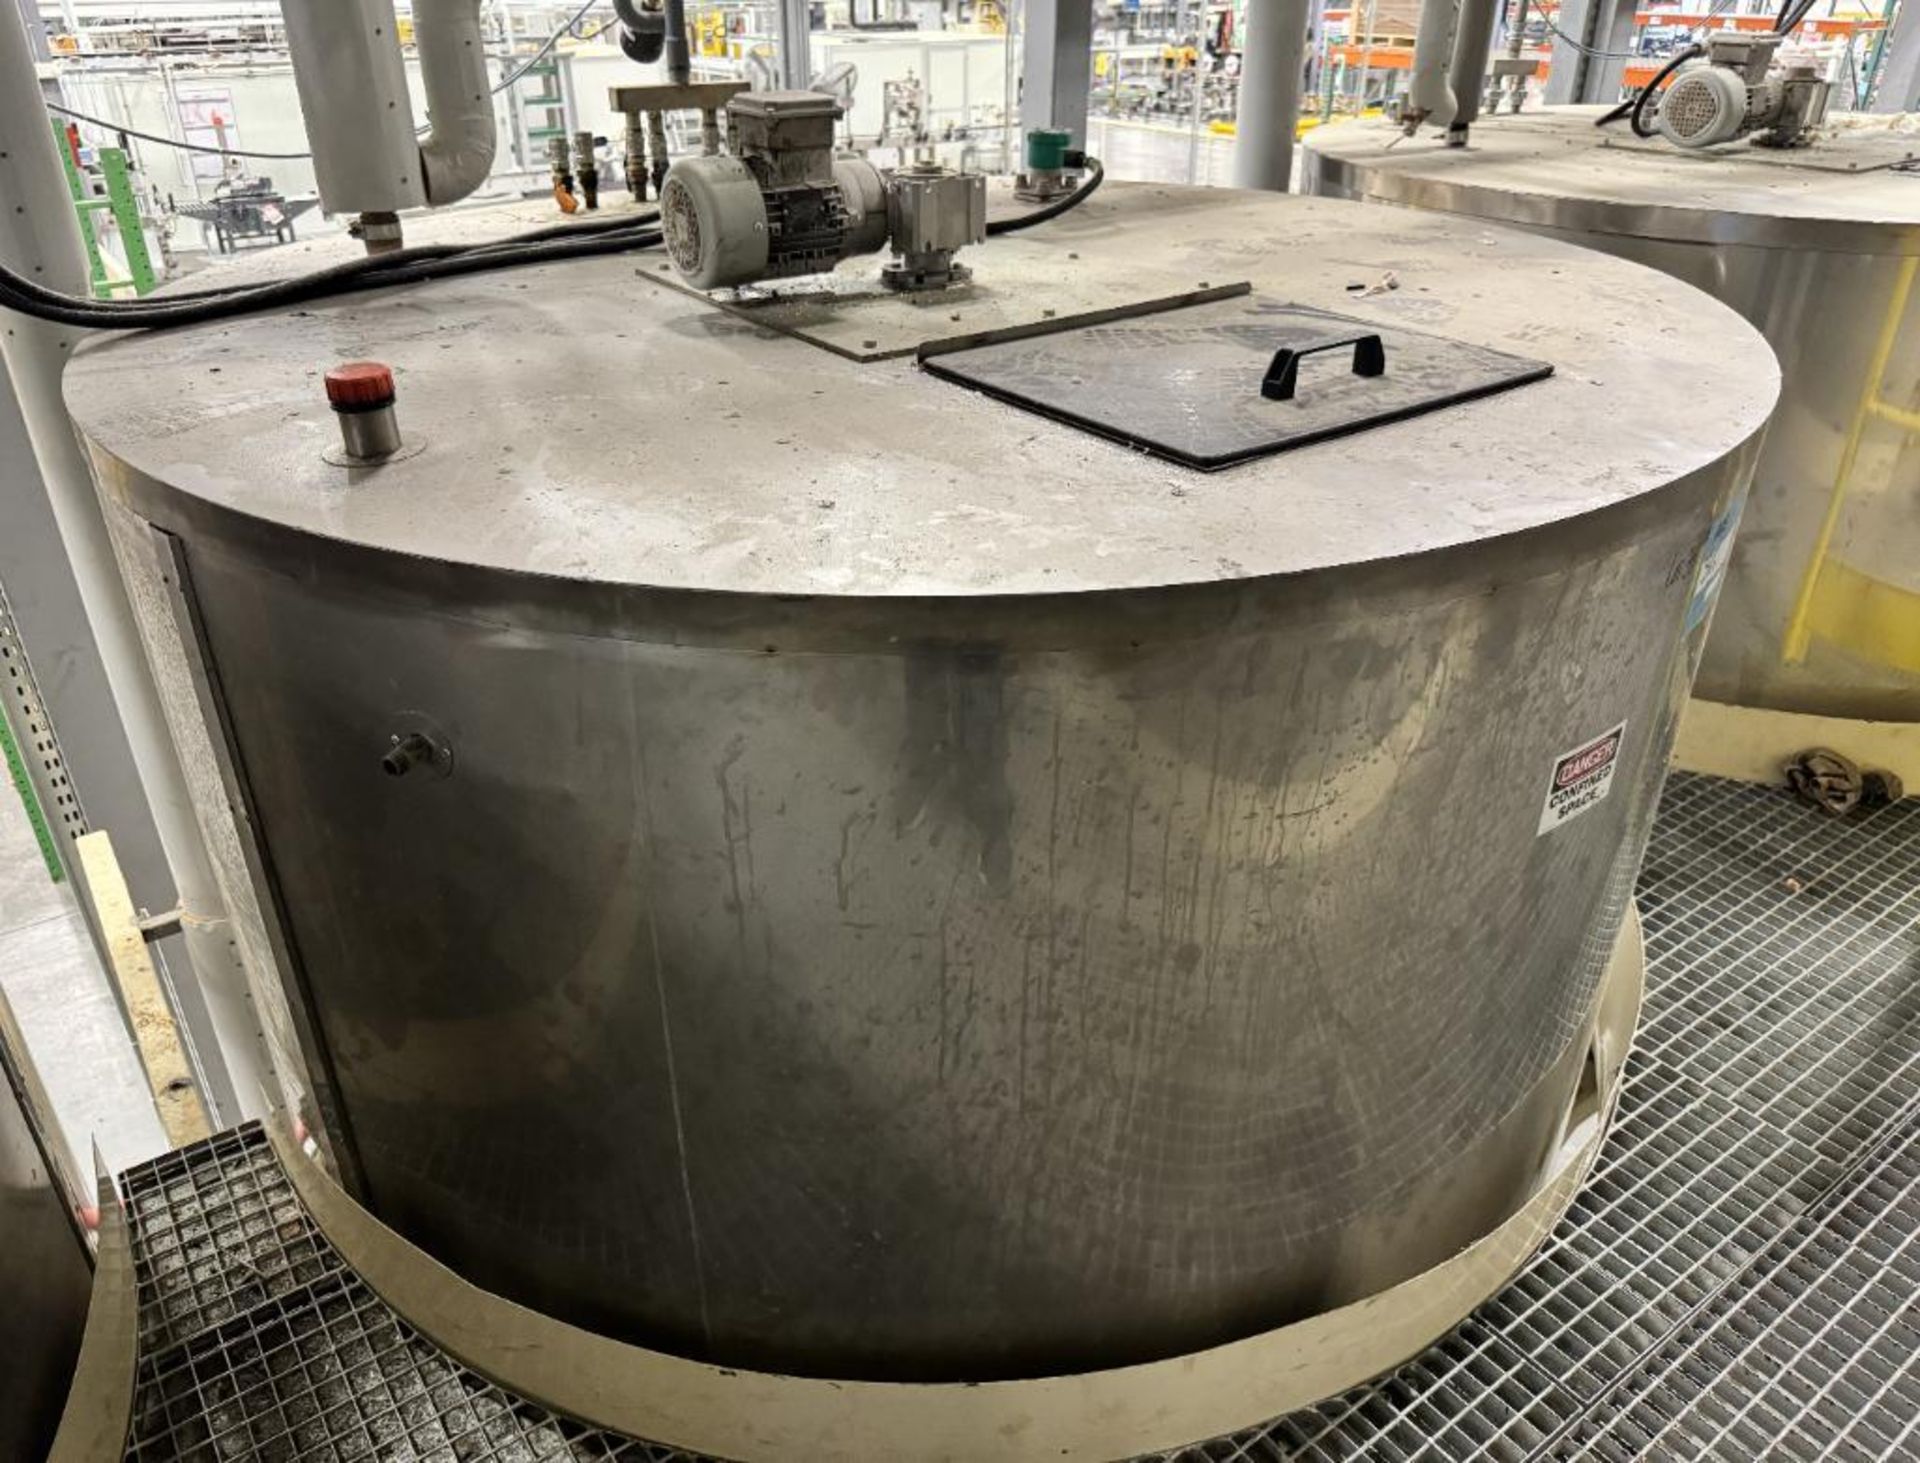 Luka Approximate 750 Gallon Stainless Steel Jacketed Mix Tank. Approximate 66" diameter x 50" straig - Image 4 of 10